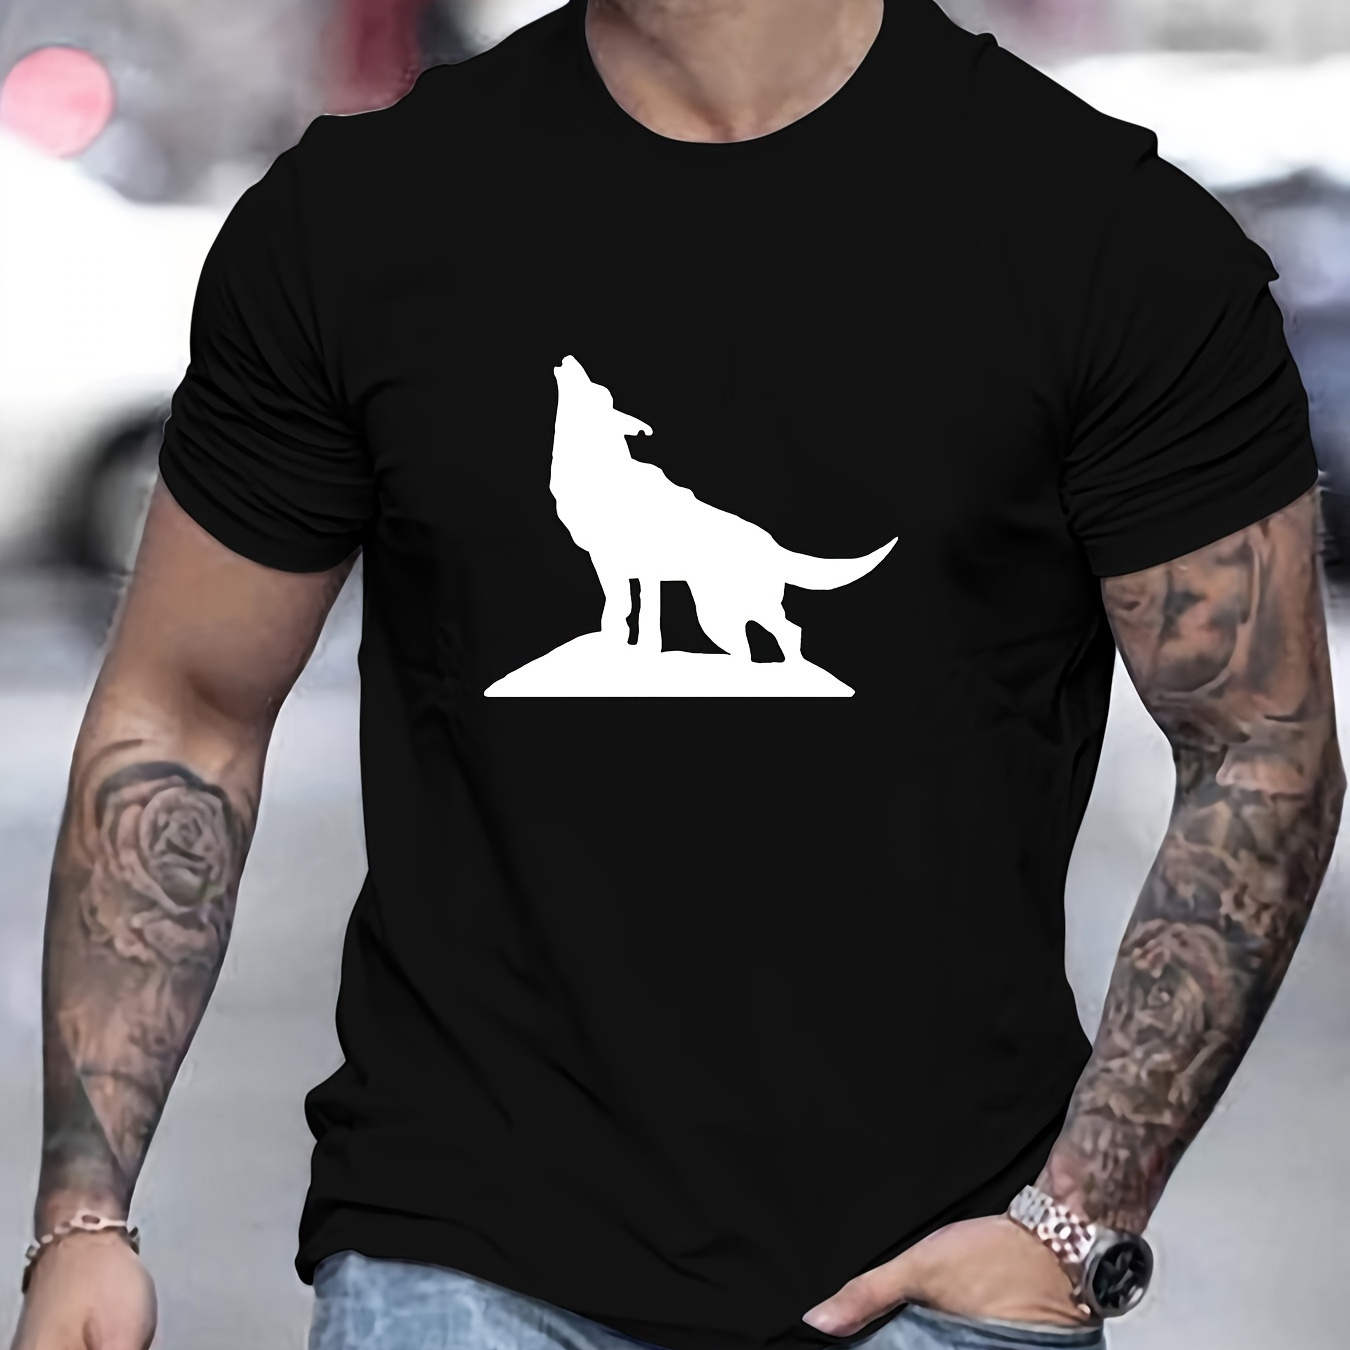 

Howling Wolf Print T Shirt, Tees For Men, Casual Short Sleeve T-shirt For Summer